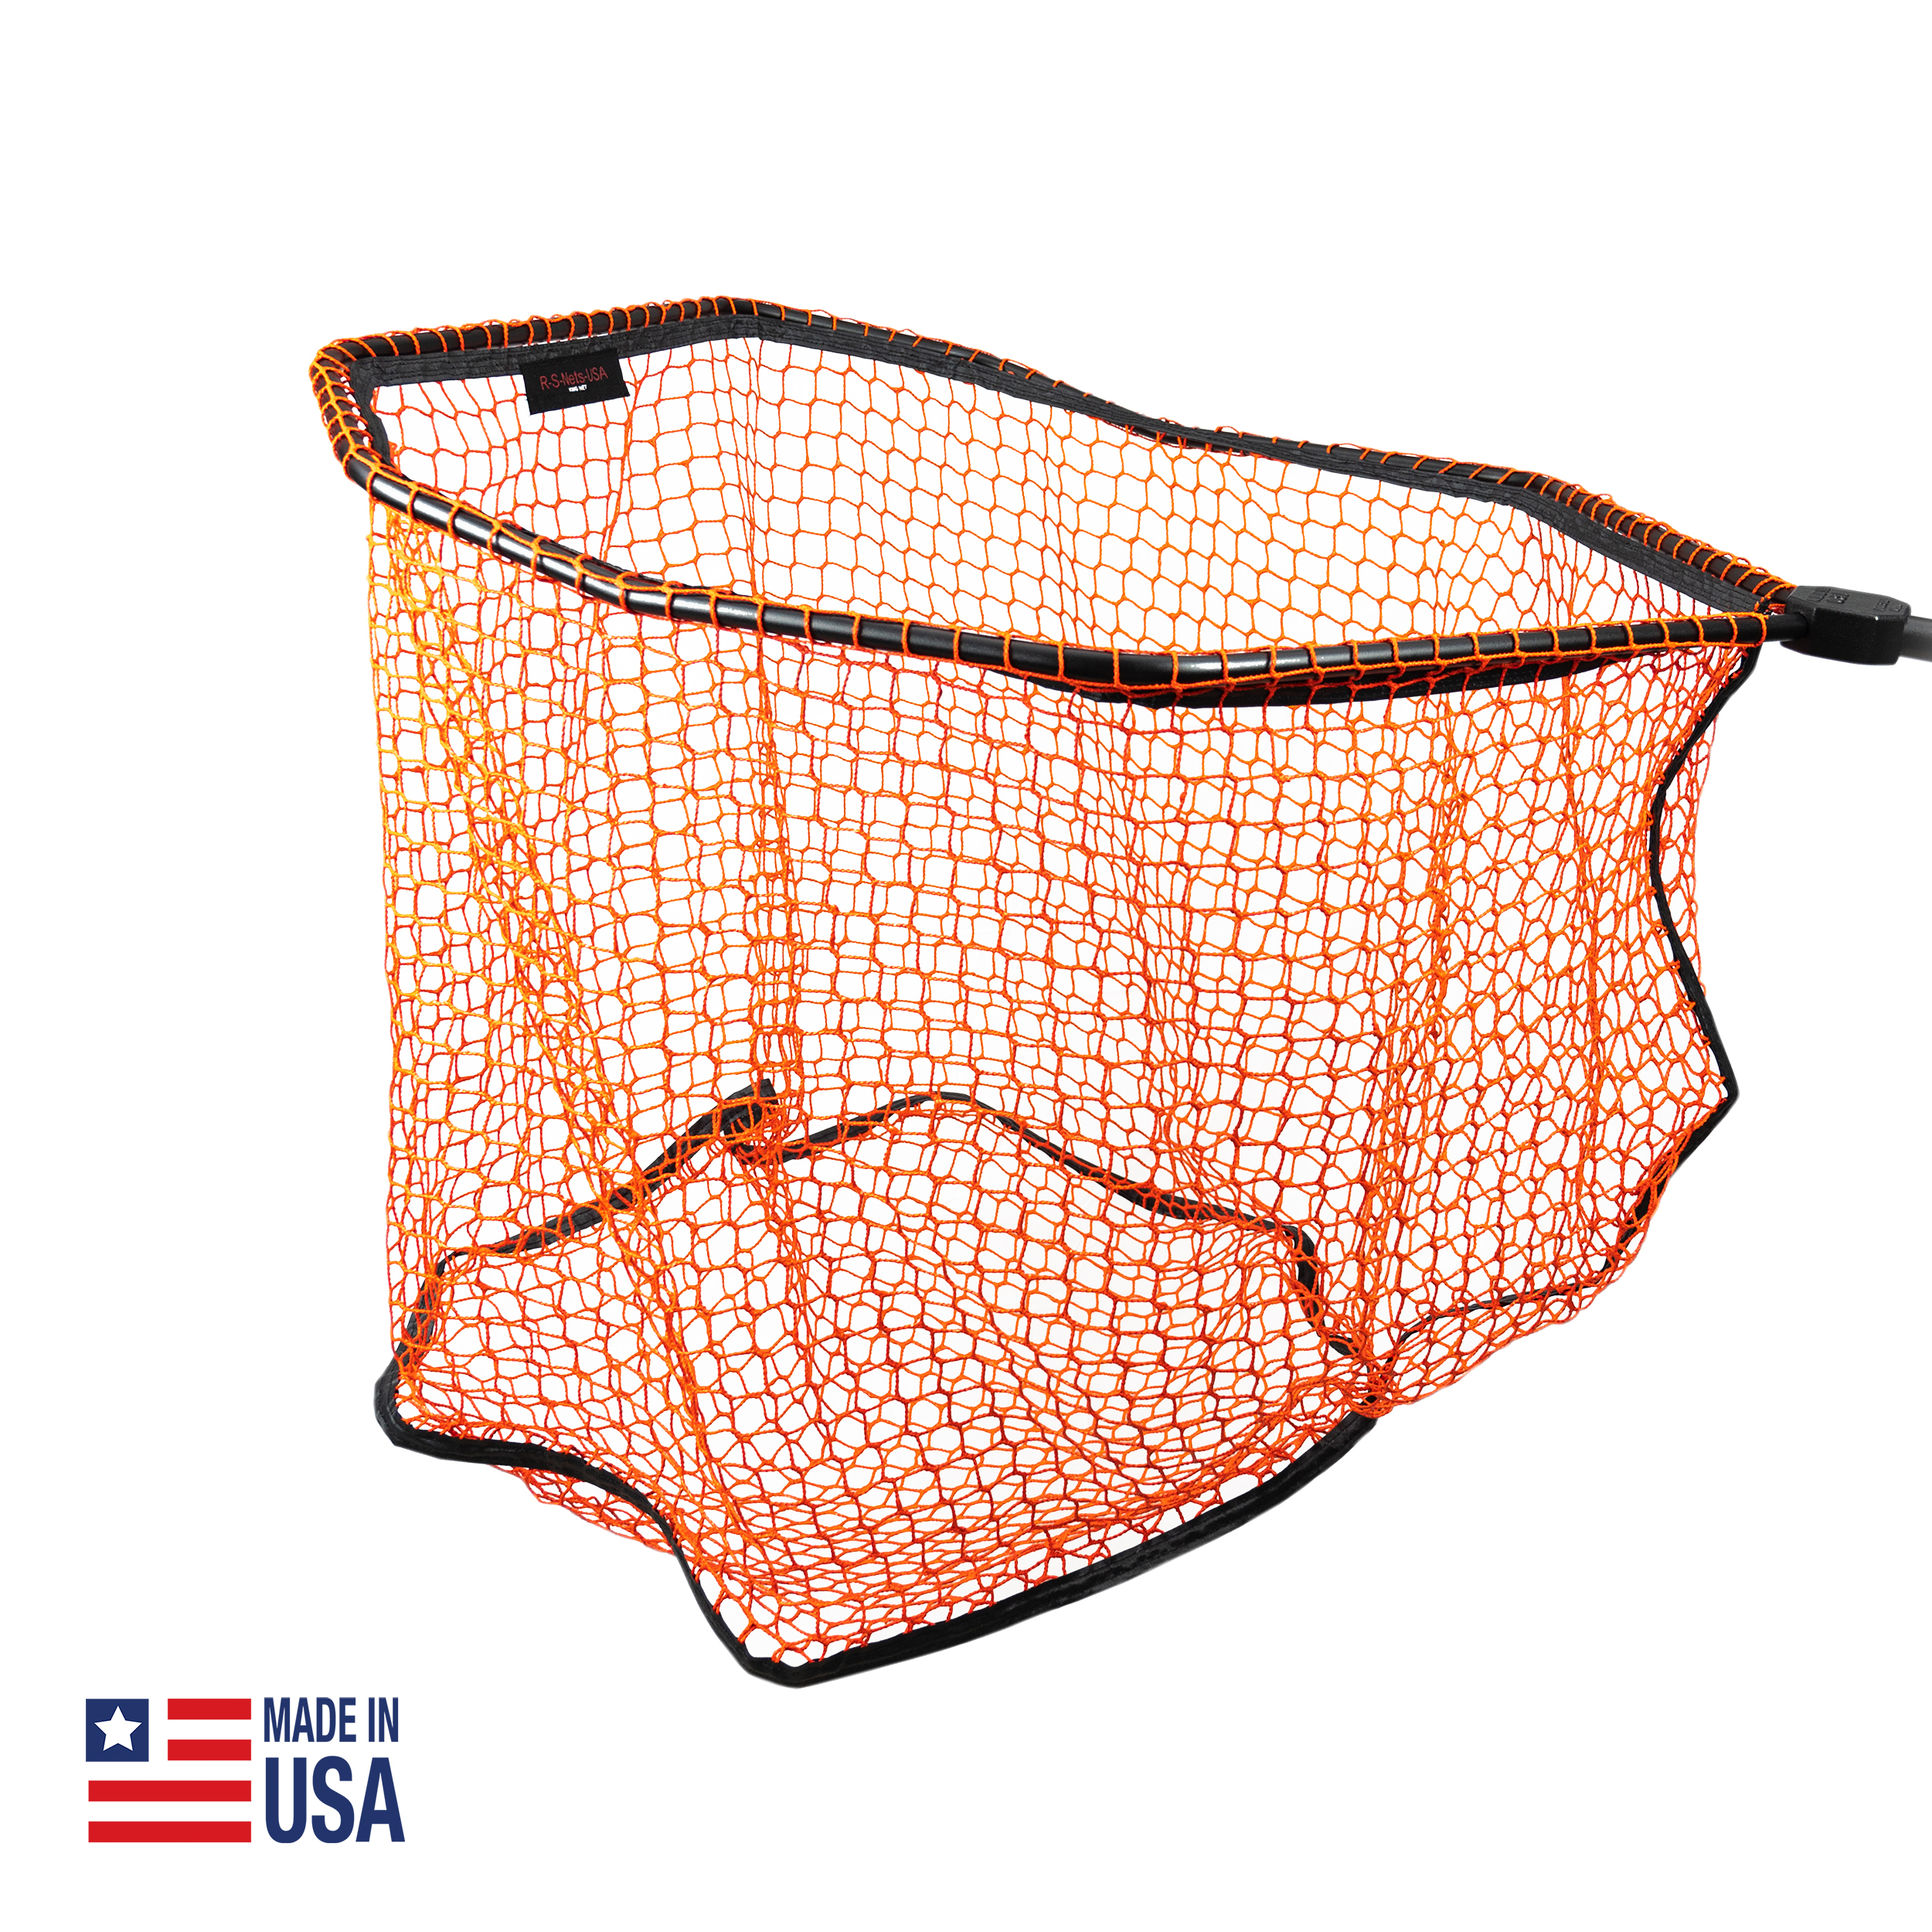 OUR NETS  RS NETS USA